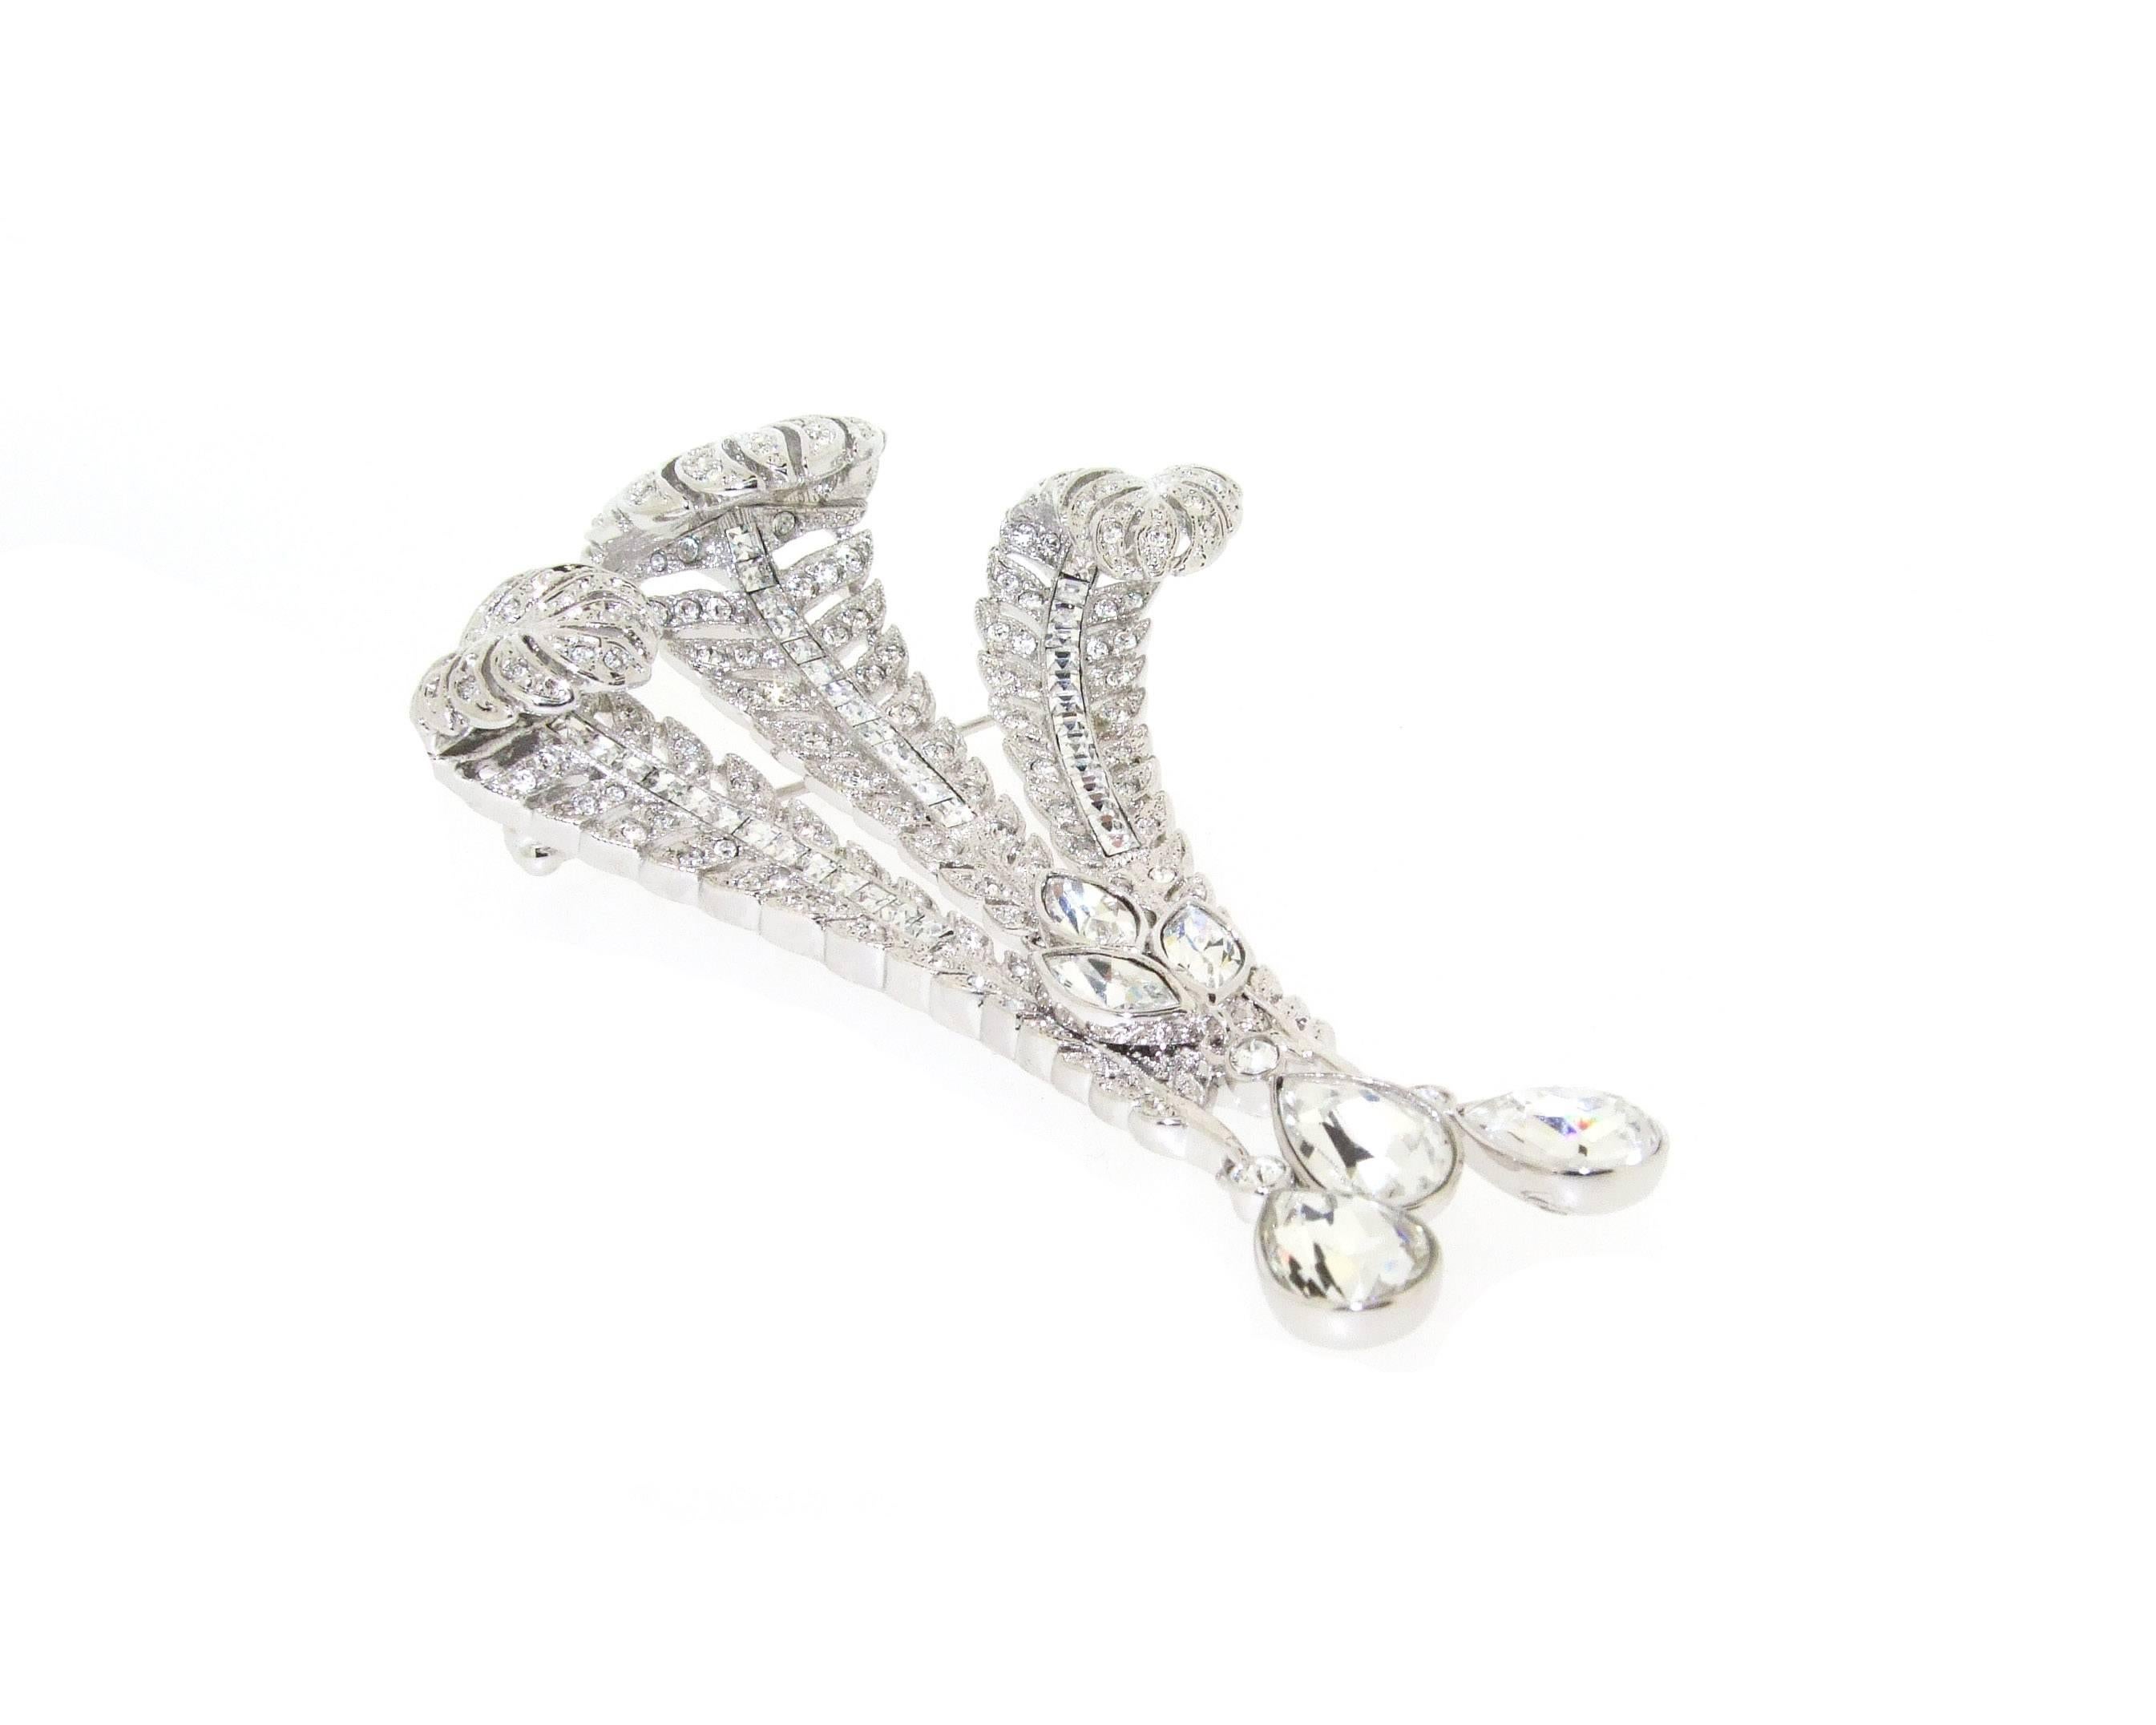 A stunning brooch depicting the Prince of Wales feathers set with cubic zirconia, with zircon triple drops.

Set in chrome plated metal, it measures 7.8cm high by 5.3cm wide at the top and 1.4cm wide at the bottom, by 1.8cm deep including the pin